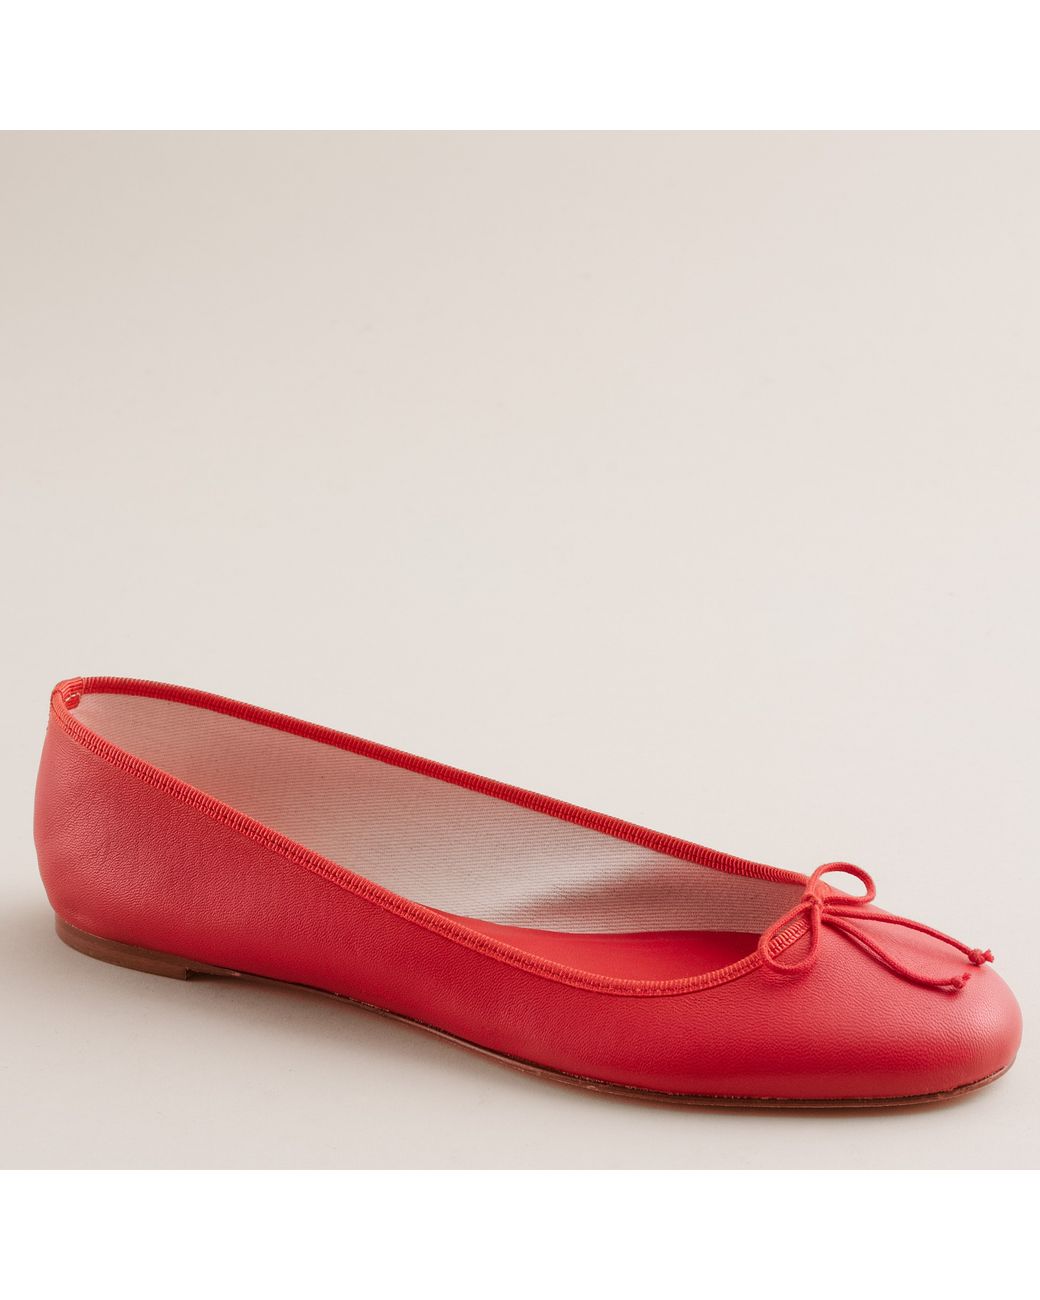 J.Crew Classic Leather Ballet Flats Red Lyst